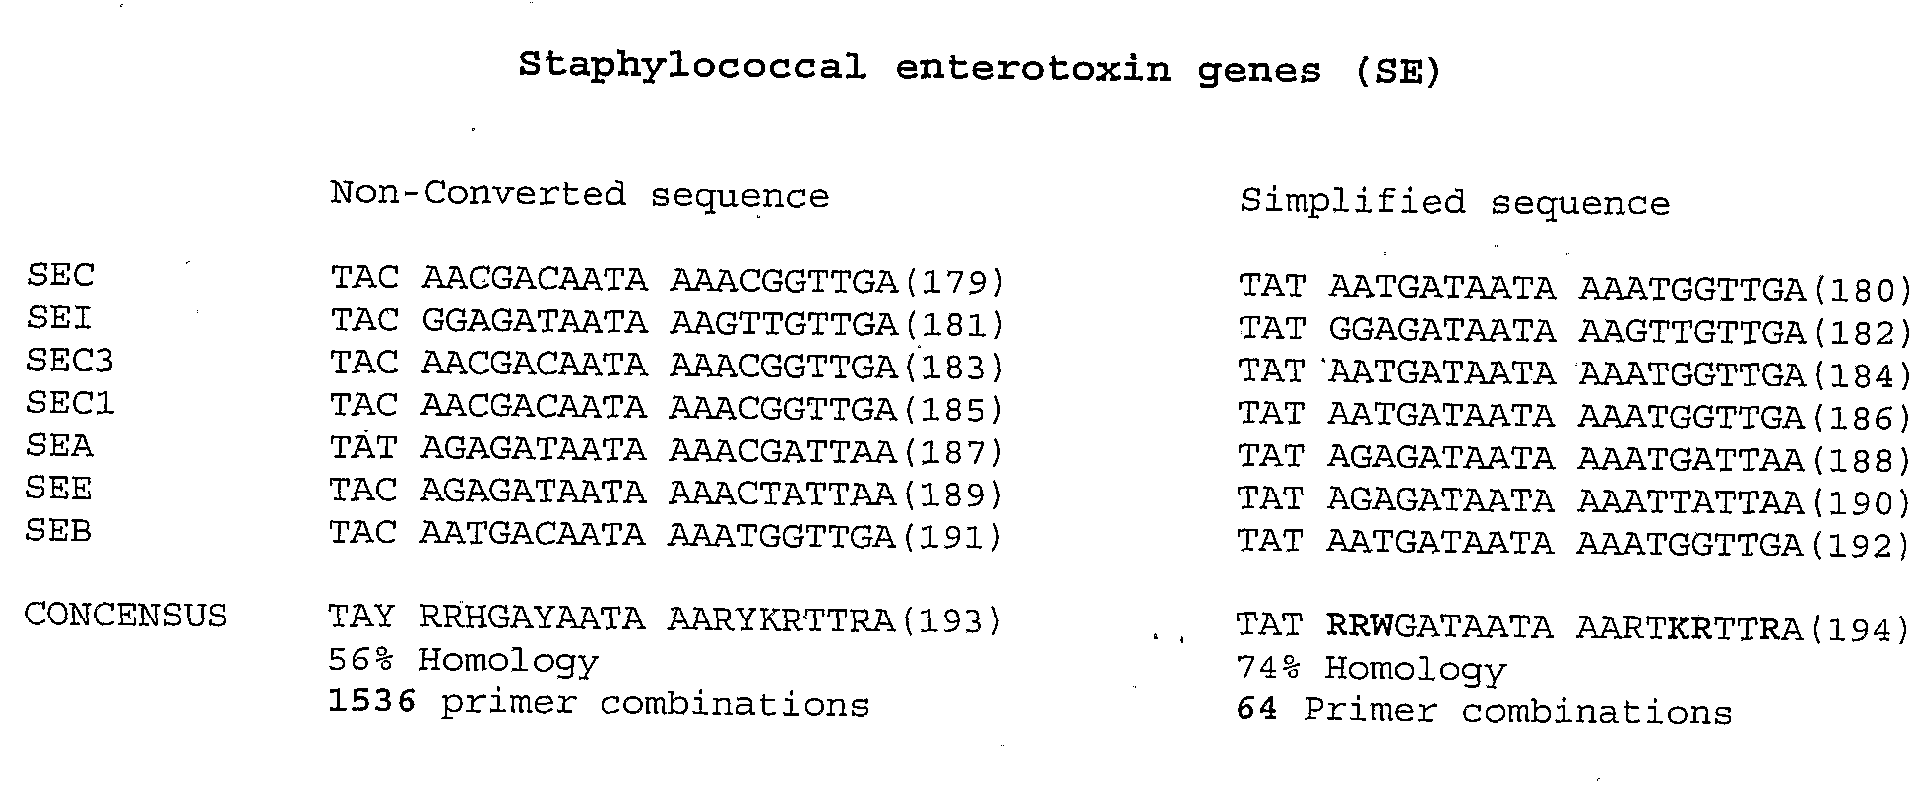 Methods for simplifying microbial nucleic acids by chemical modification of cytosines